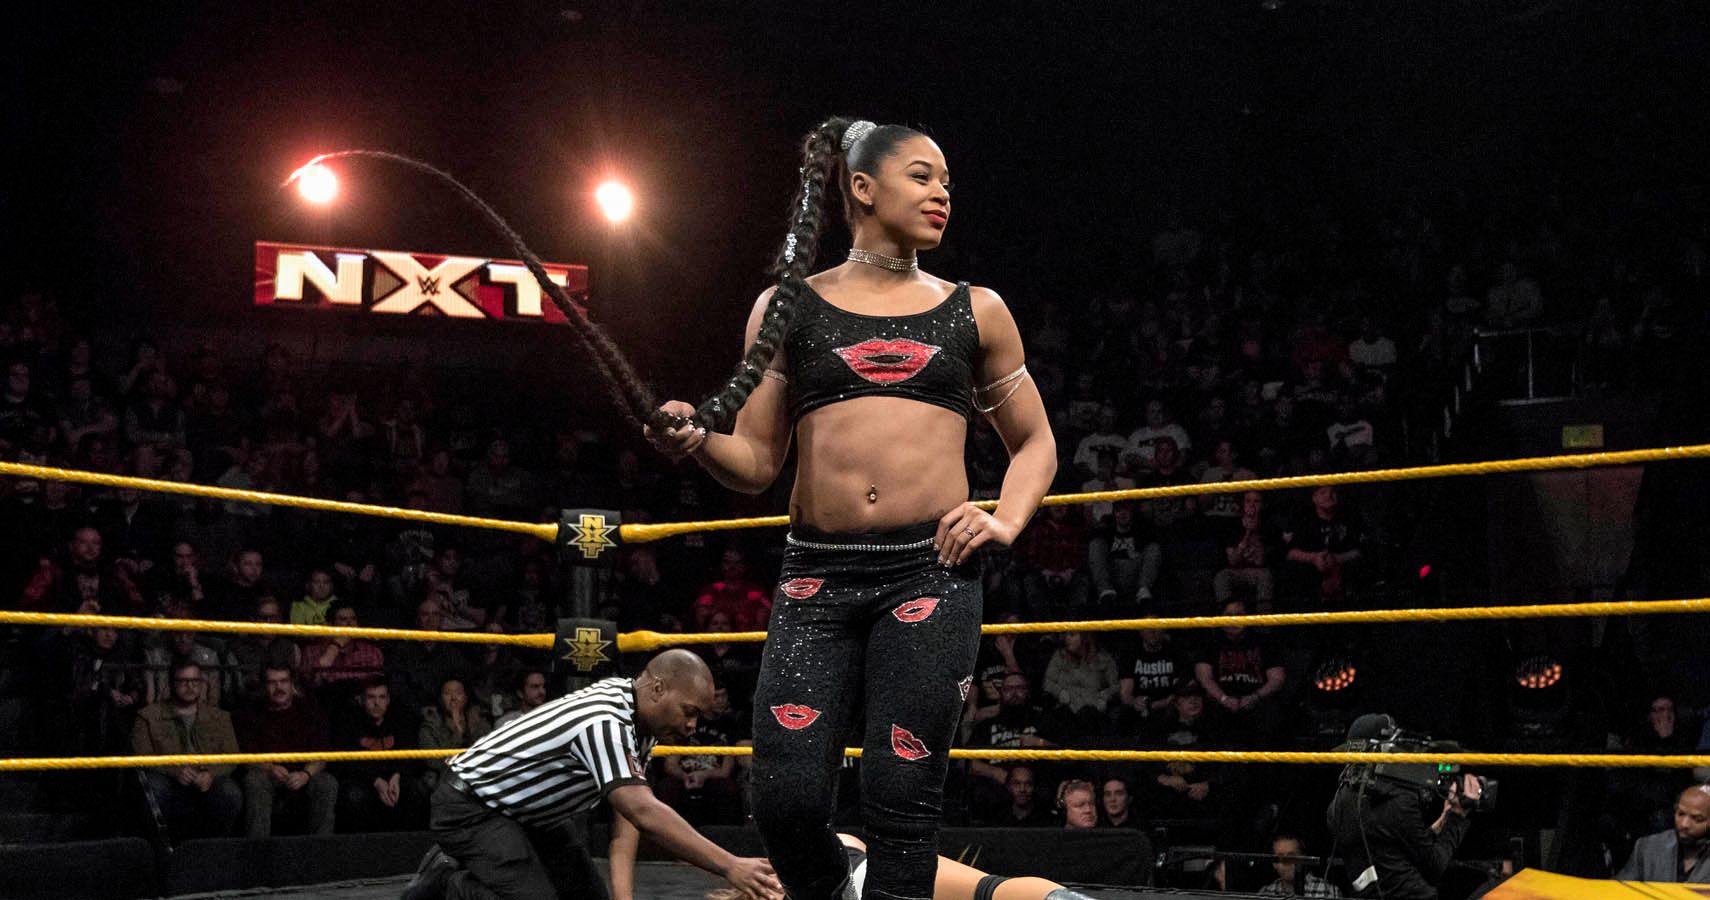 10 NXT Stars Who Need To Stay In The Developmental Brand